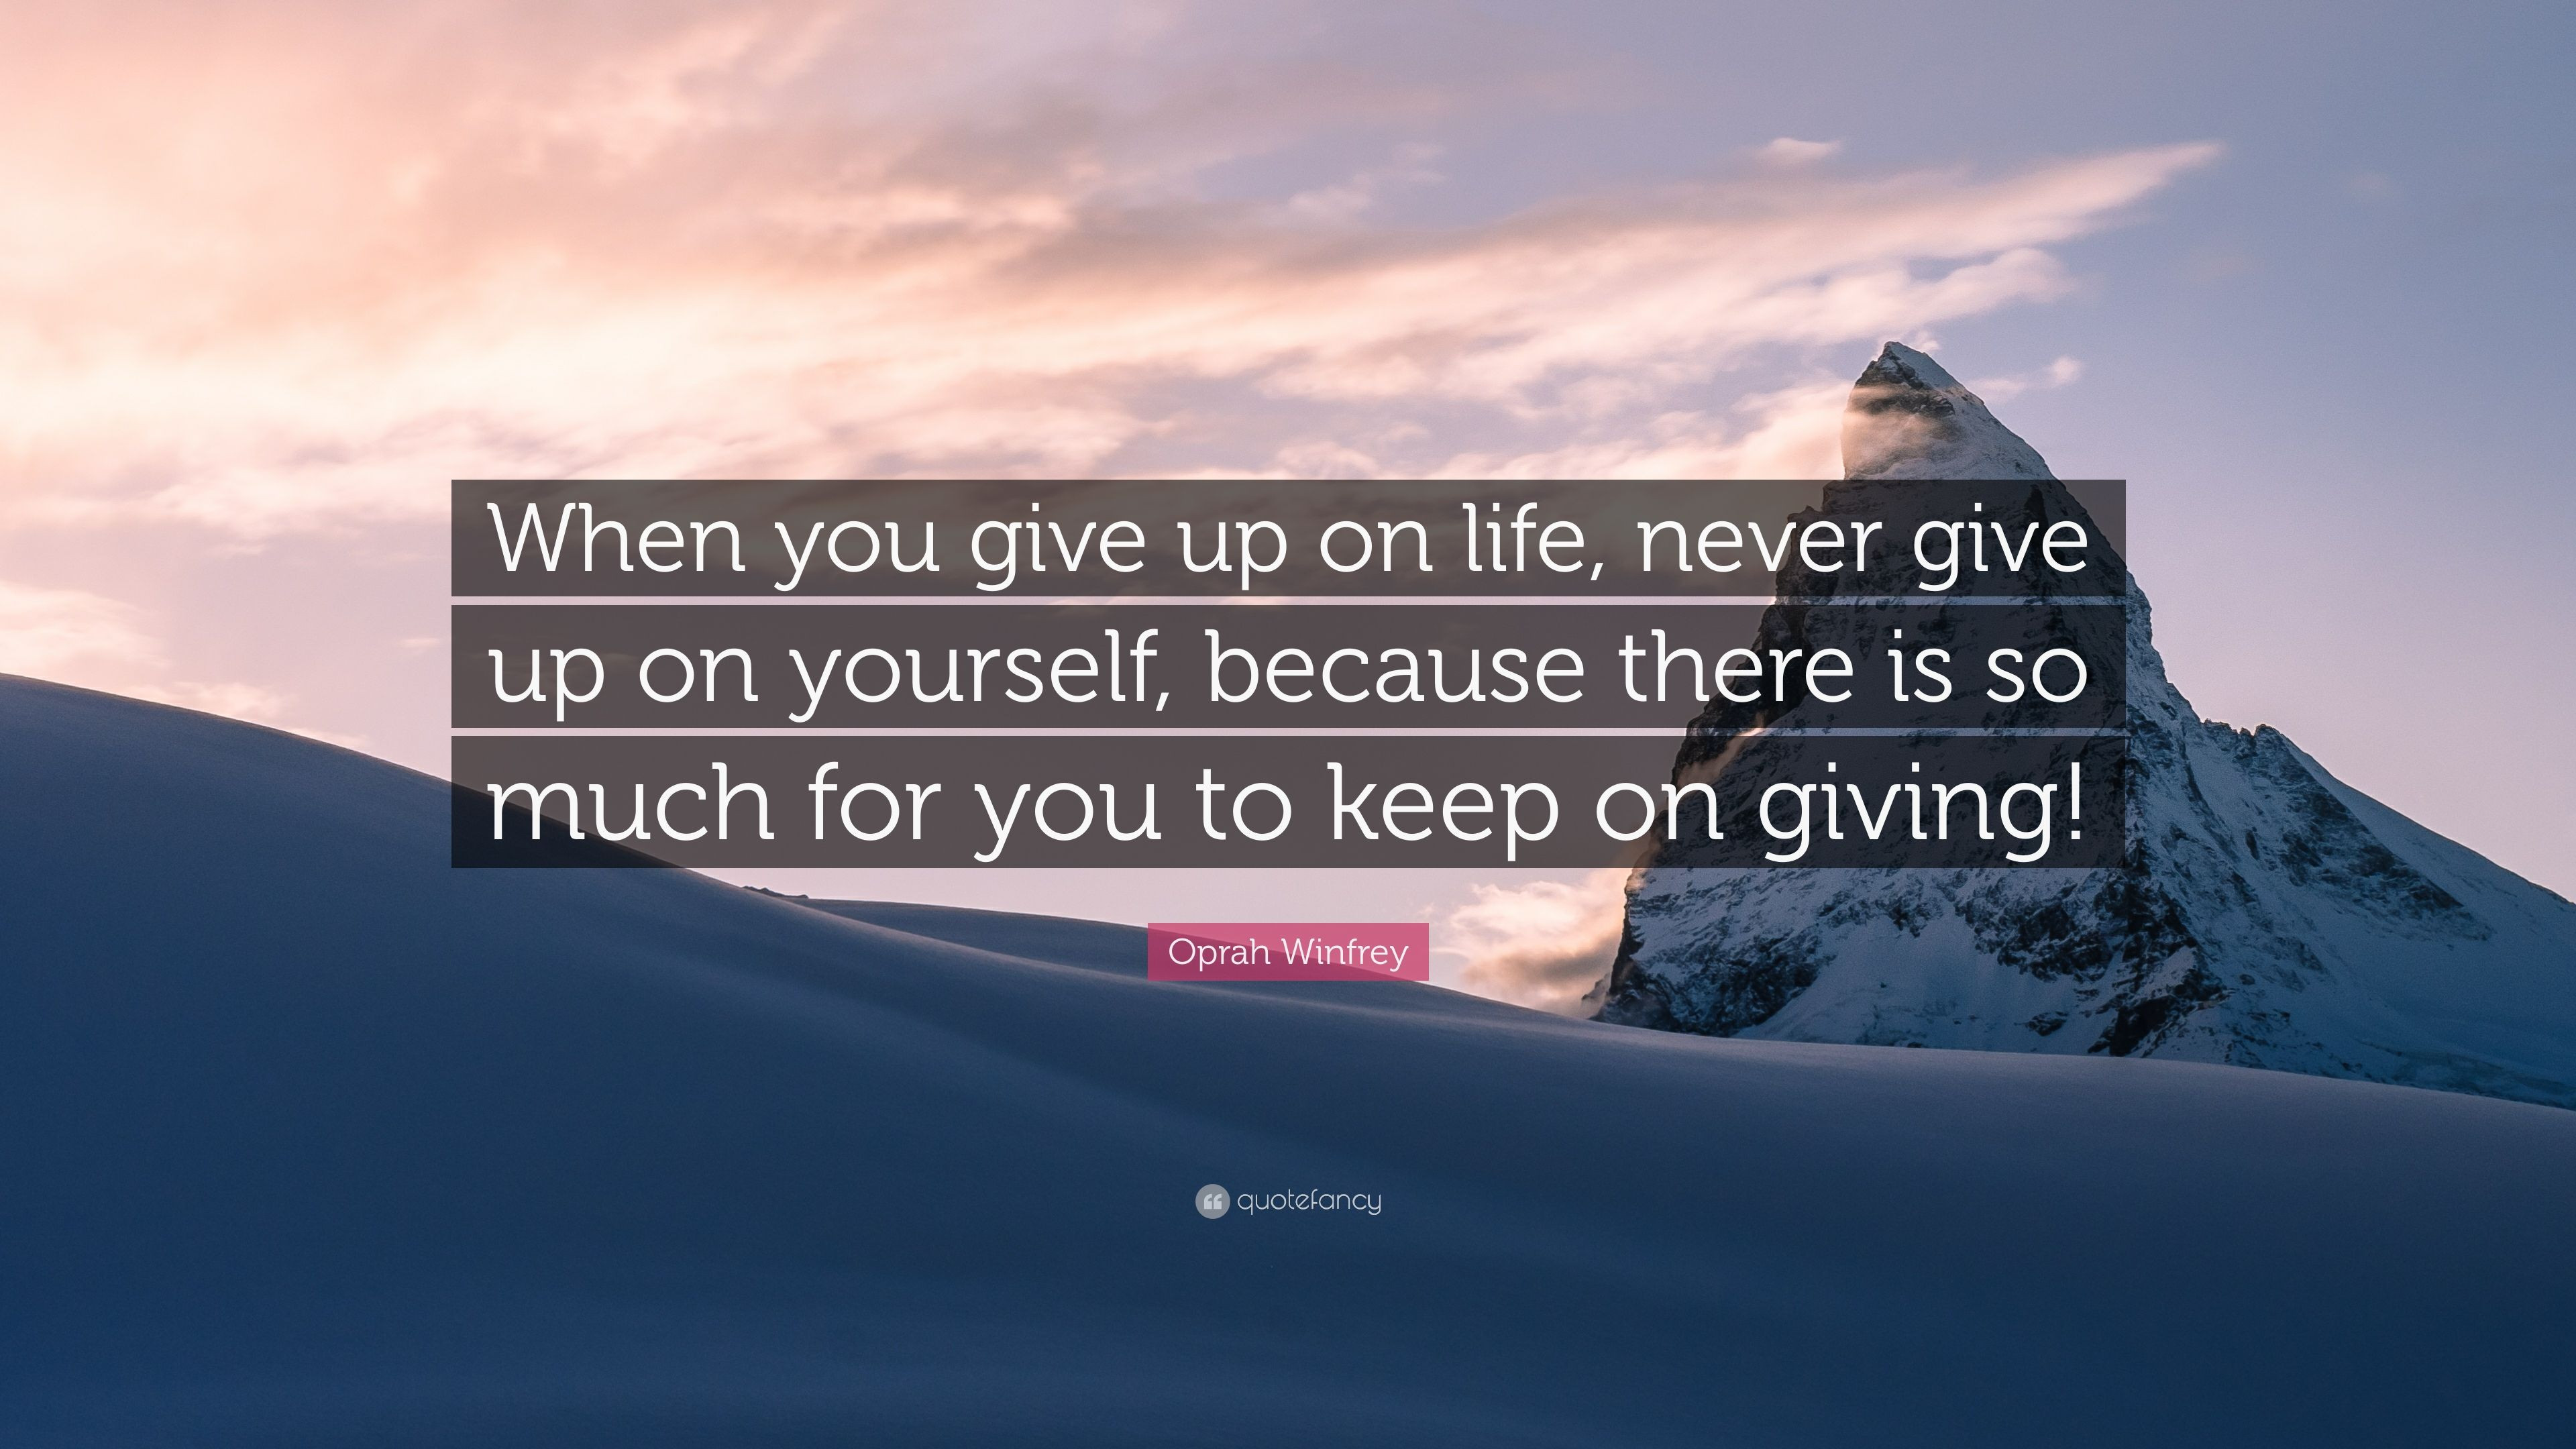 Quotes About Giving Up On Life
 Oprah Winfrey Quote “When you give up on life never give